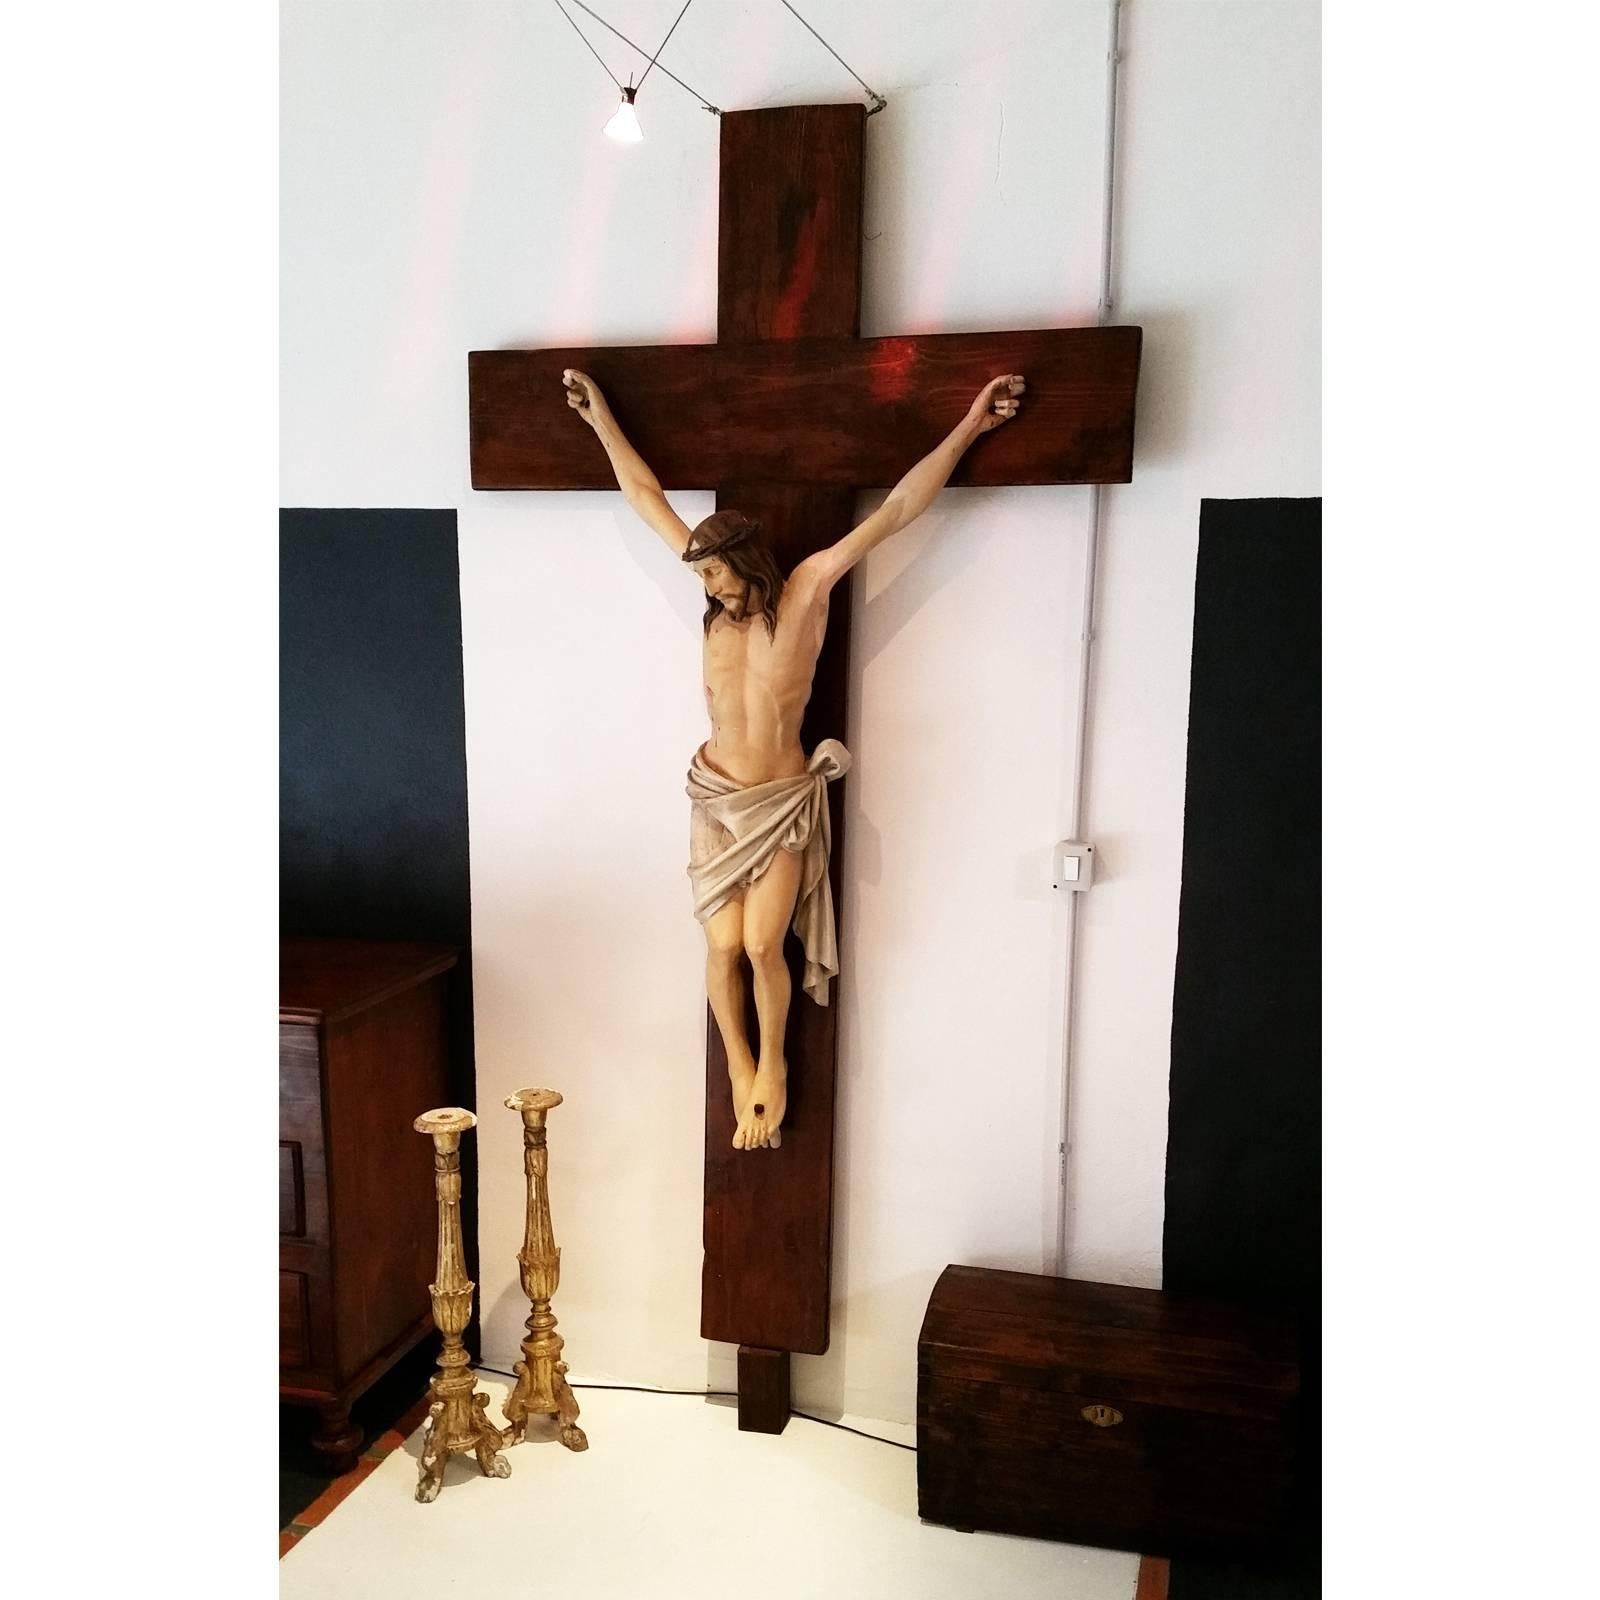 Late 19th century polychrome wood crucifix attributable to Vincenzo Cadorin.
Coming from the private Riviera del Brenta Church Home of aristocratic Venetian family
Good condition

Measures cm: 
Cross H 220 x W 120 x D 4
Christ H 140 x W 80 x D